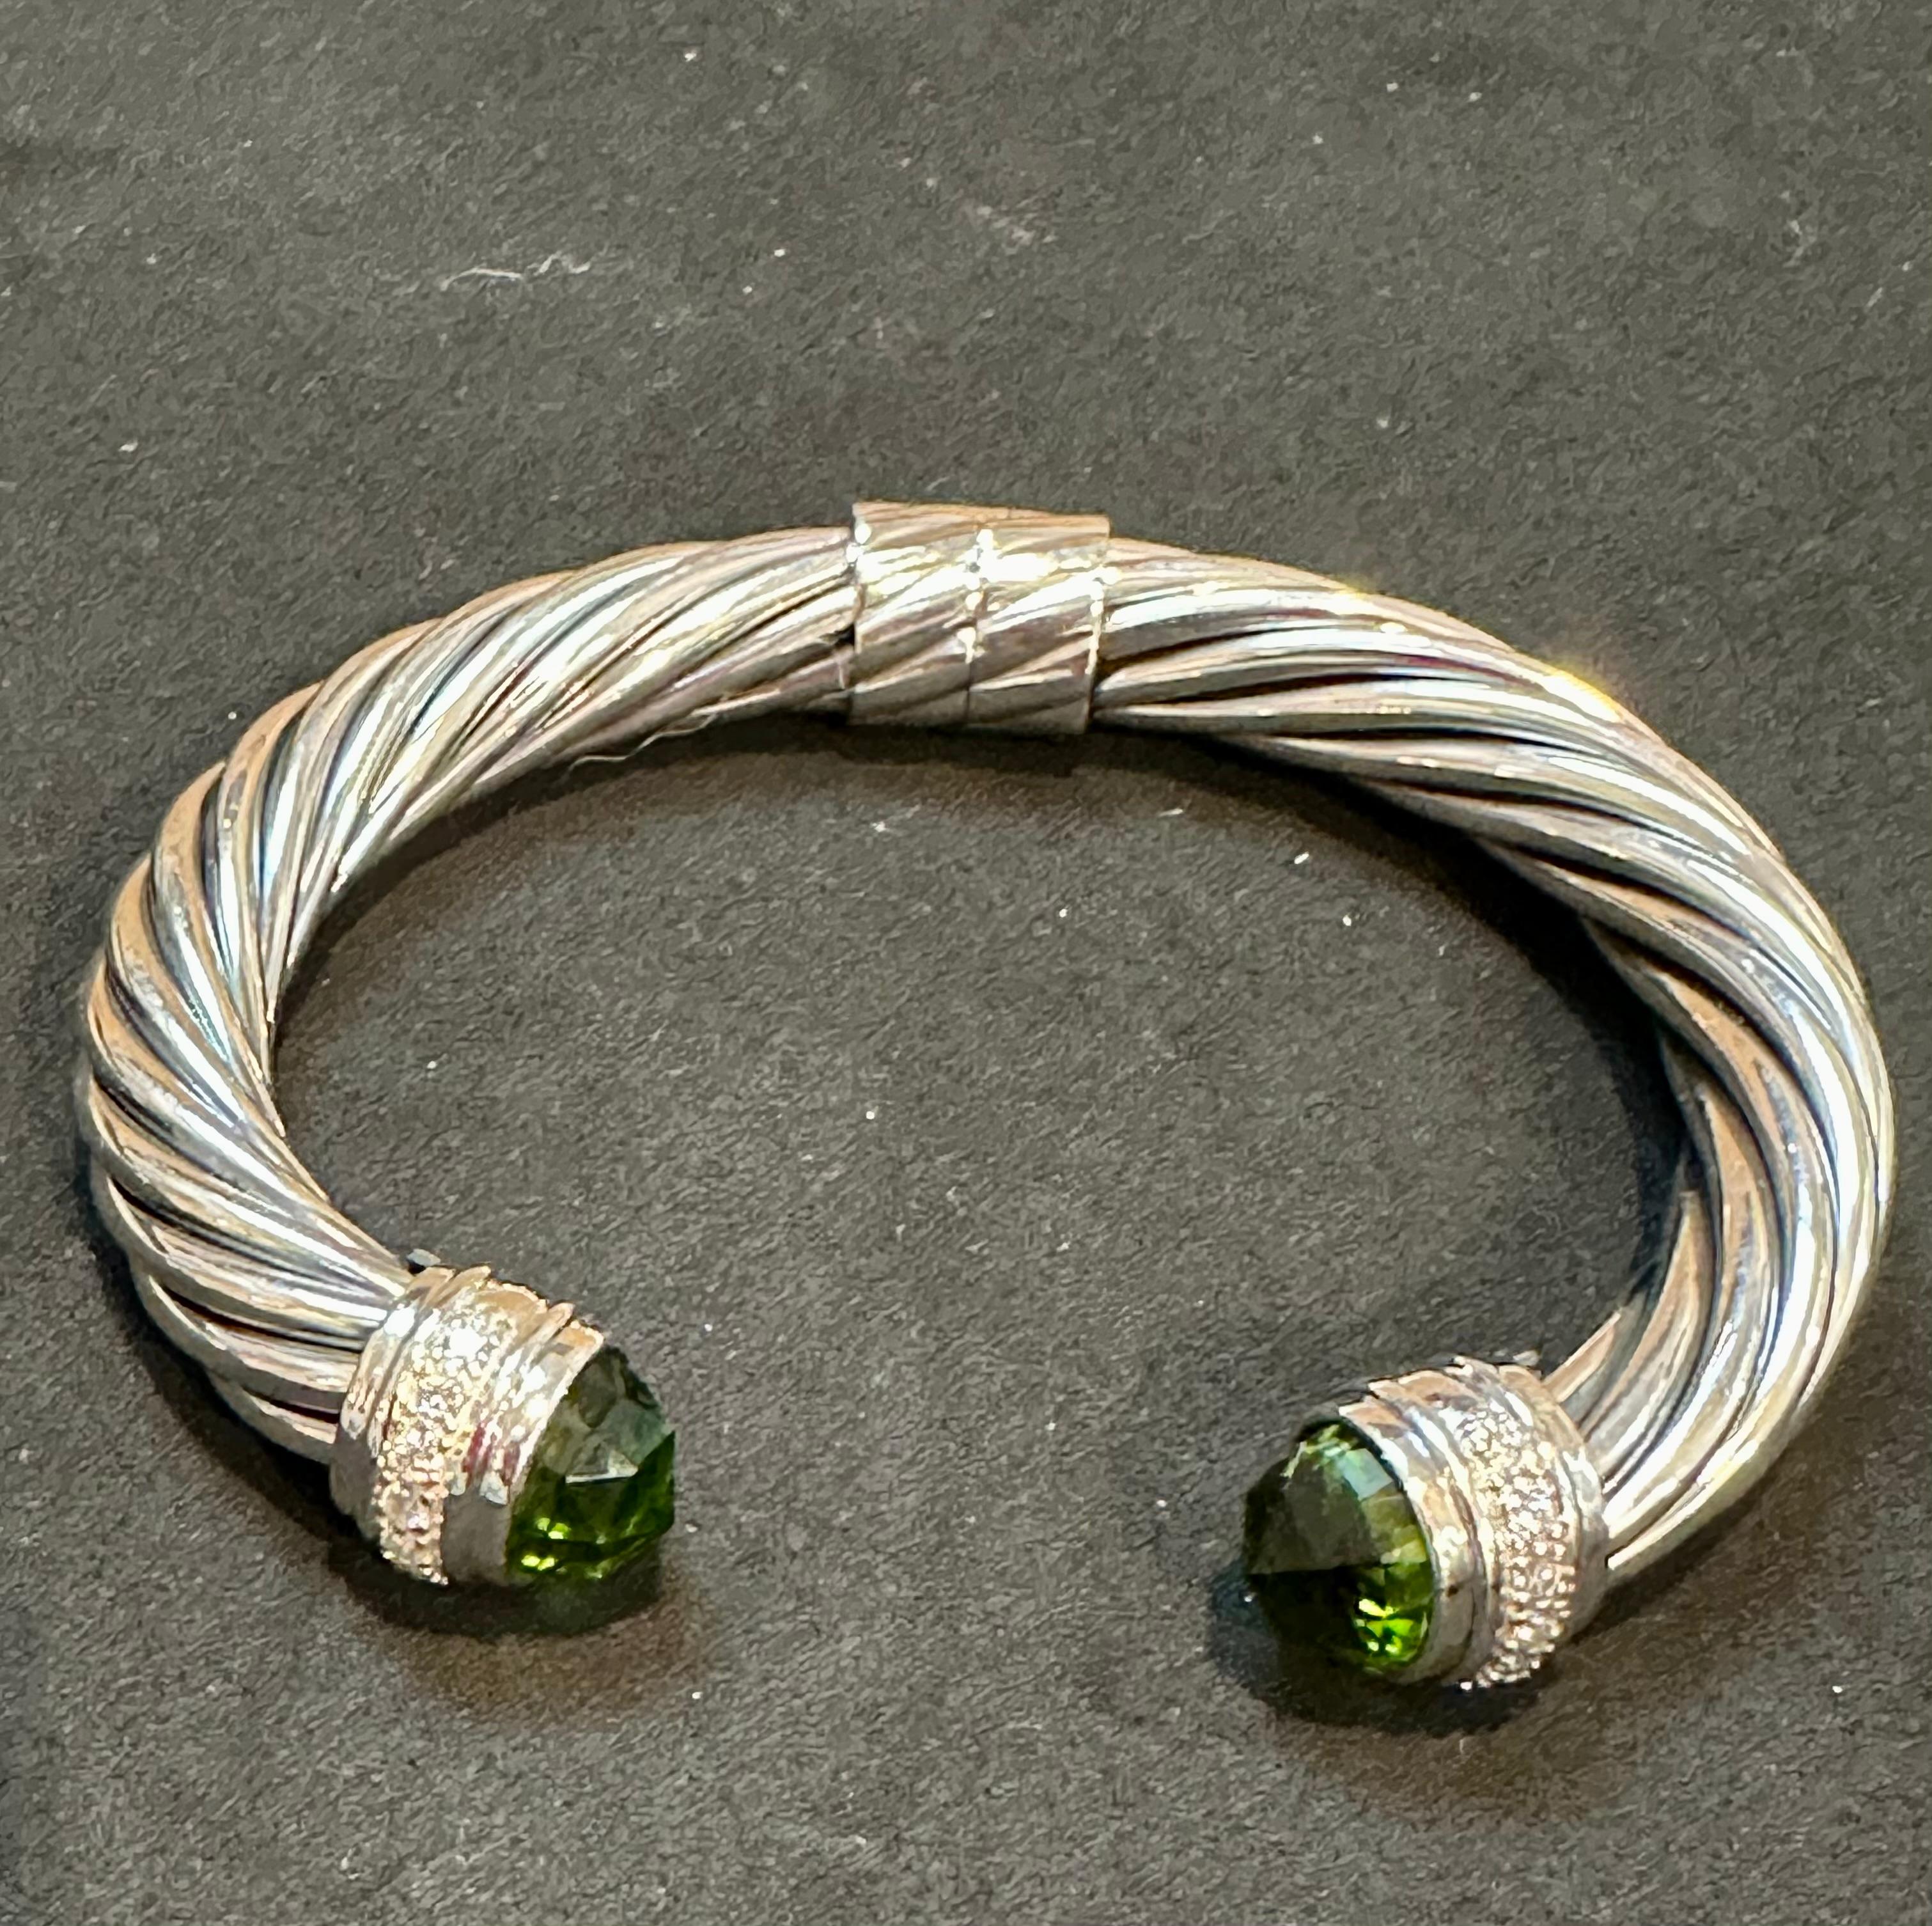 DY Cable Classics Bracelet Sterling Silver Peridot & Pave Diamond Hinged Bangle 1